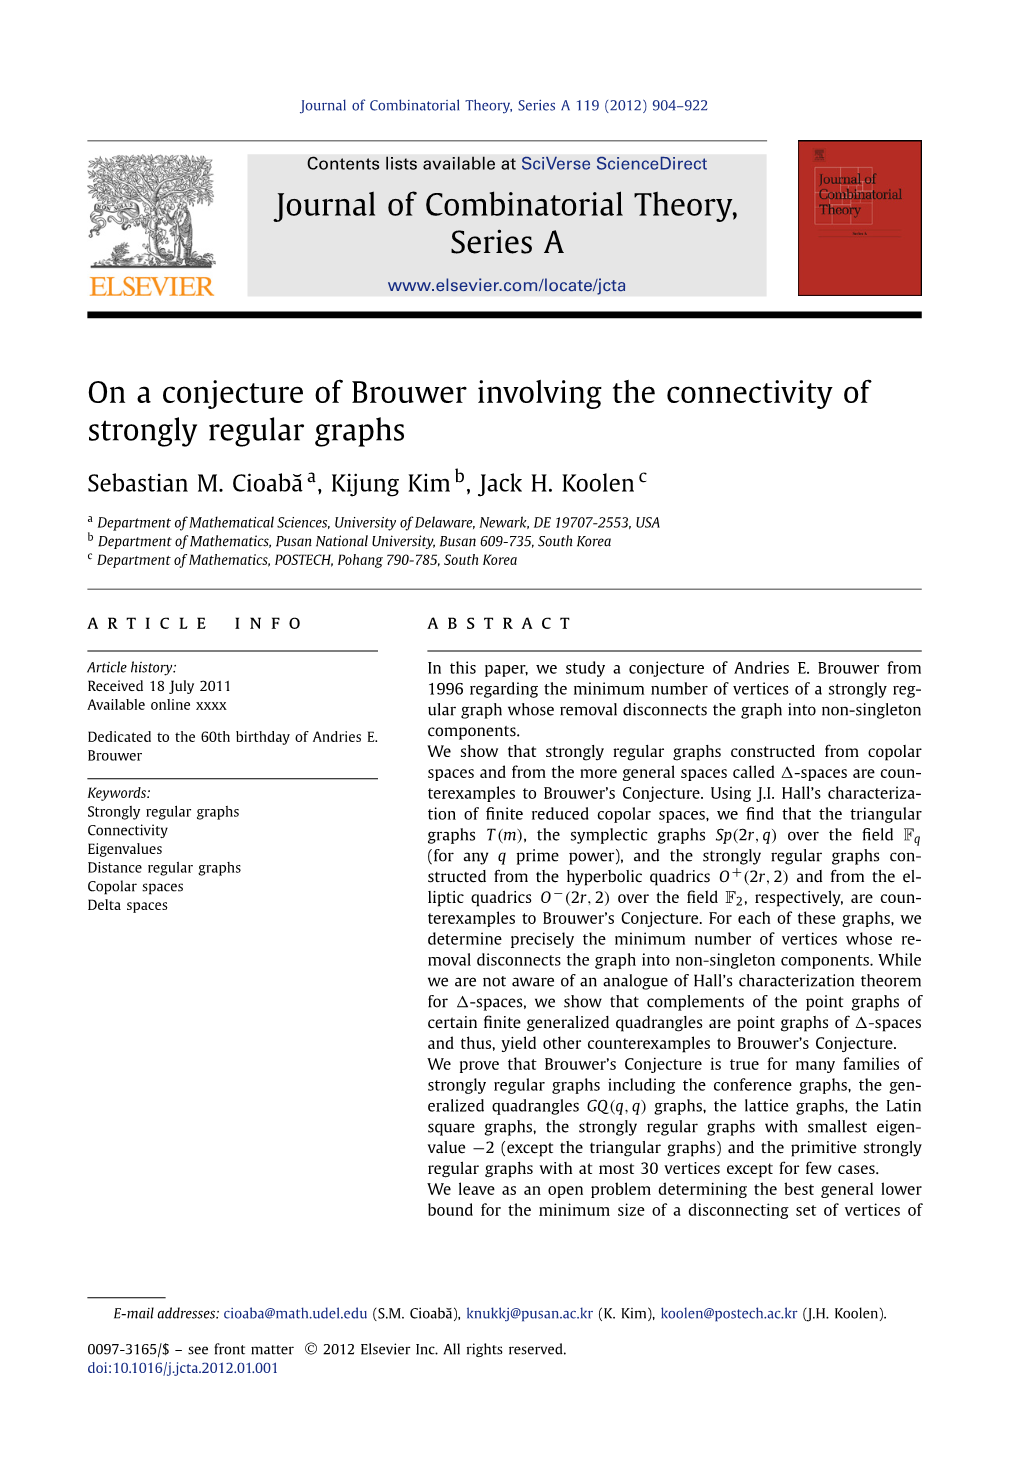 On a Conjecture of Brouwer Involving the Connectivity of Strongly Regular Graphs